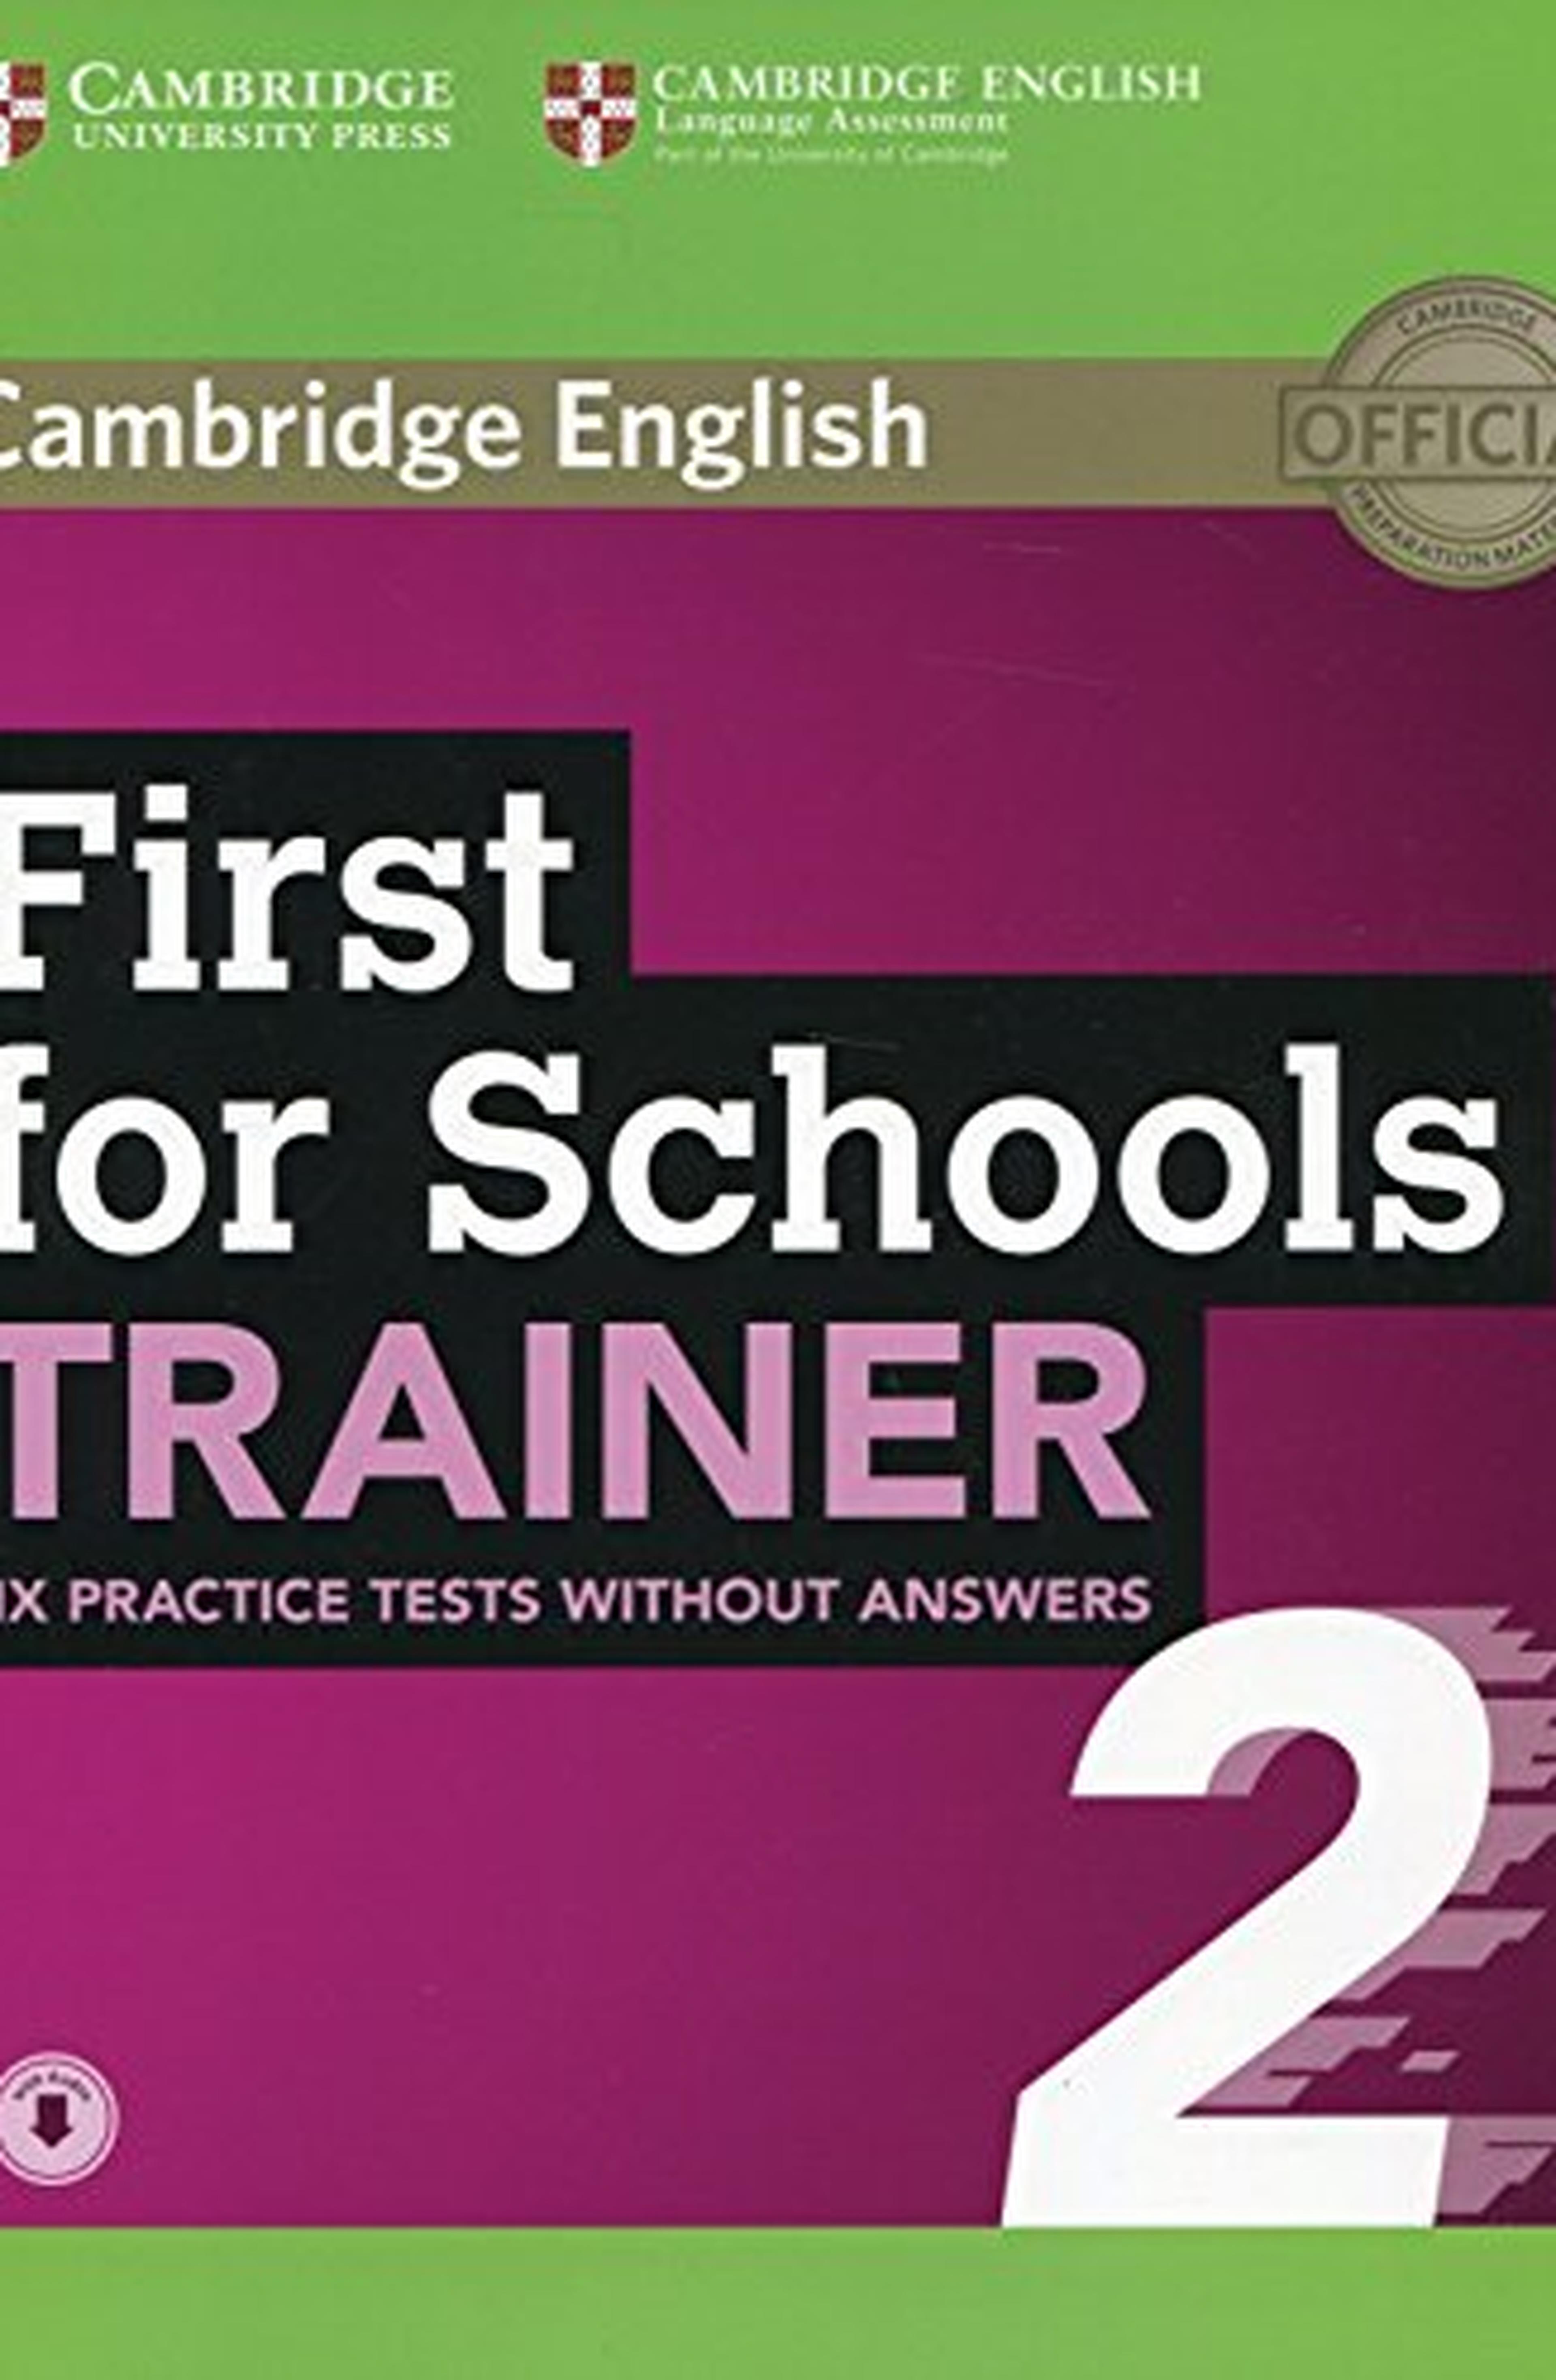 First for Schools Trainer 2 6 Practice Tests without Answers with Audio [Lingua inglese]